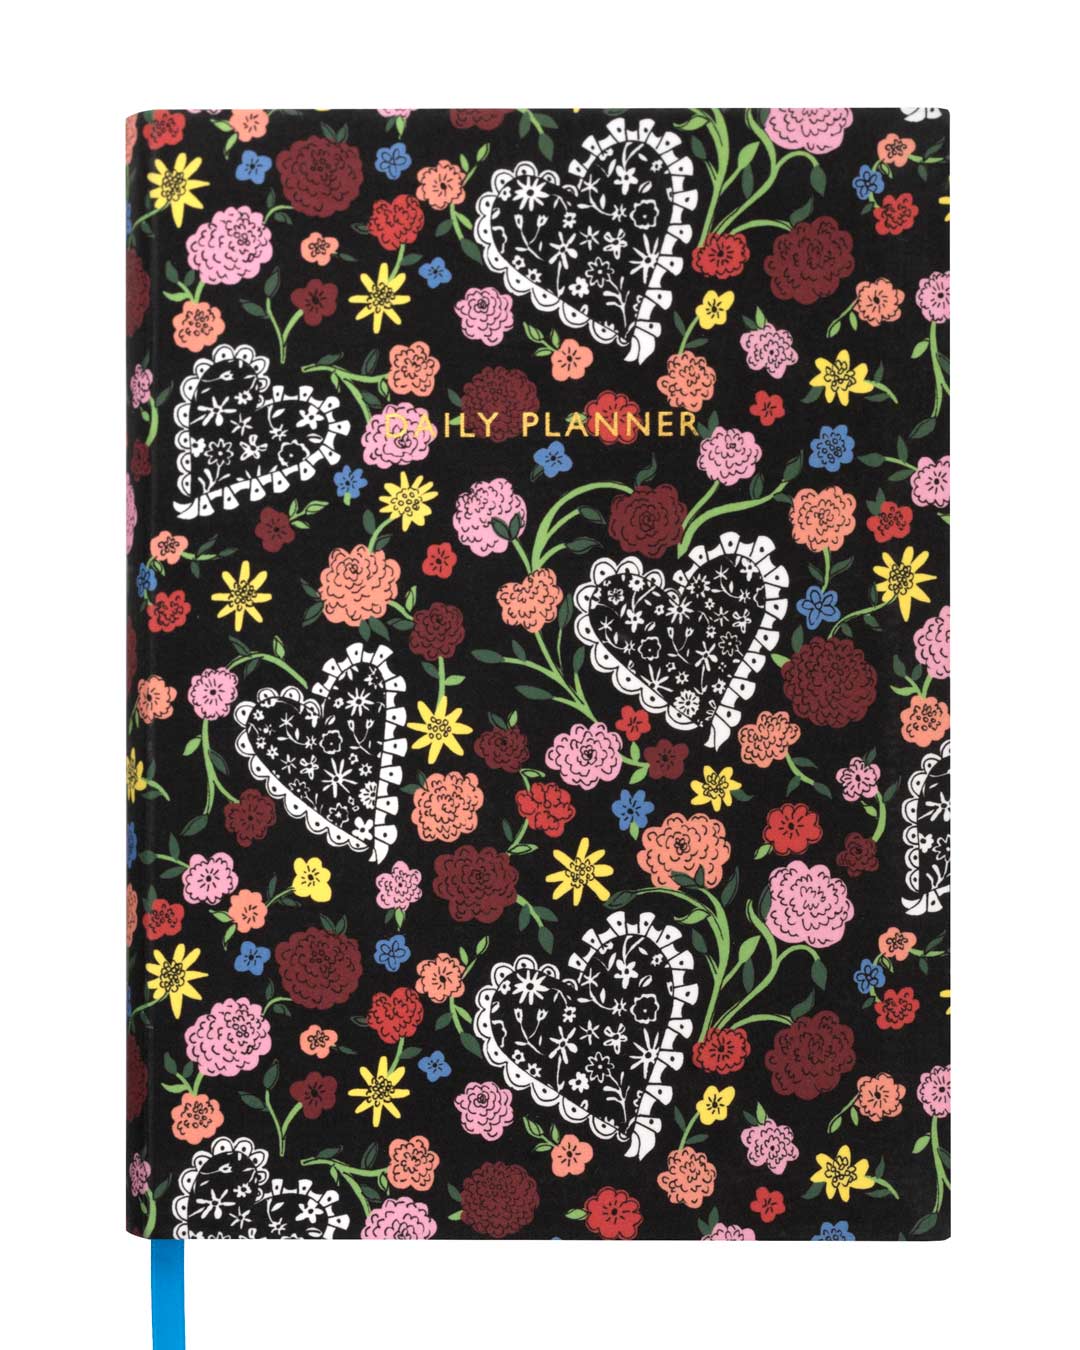 Cath Kidston Lacy Hearts Daily Planner (7587)